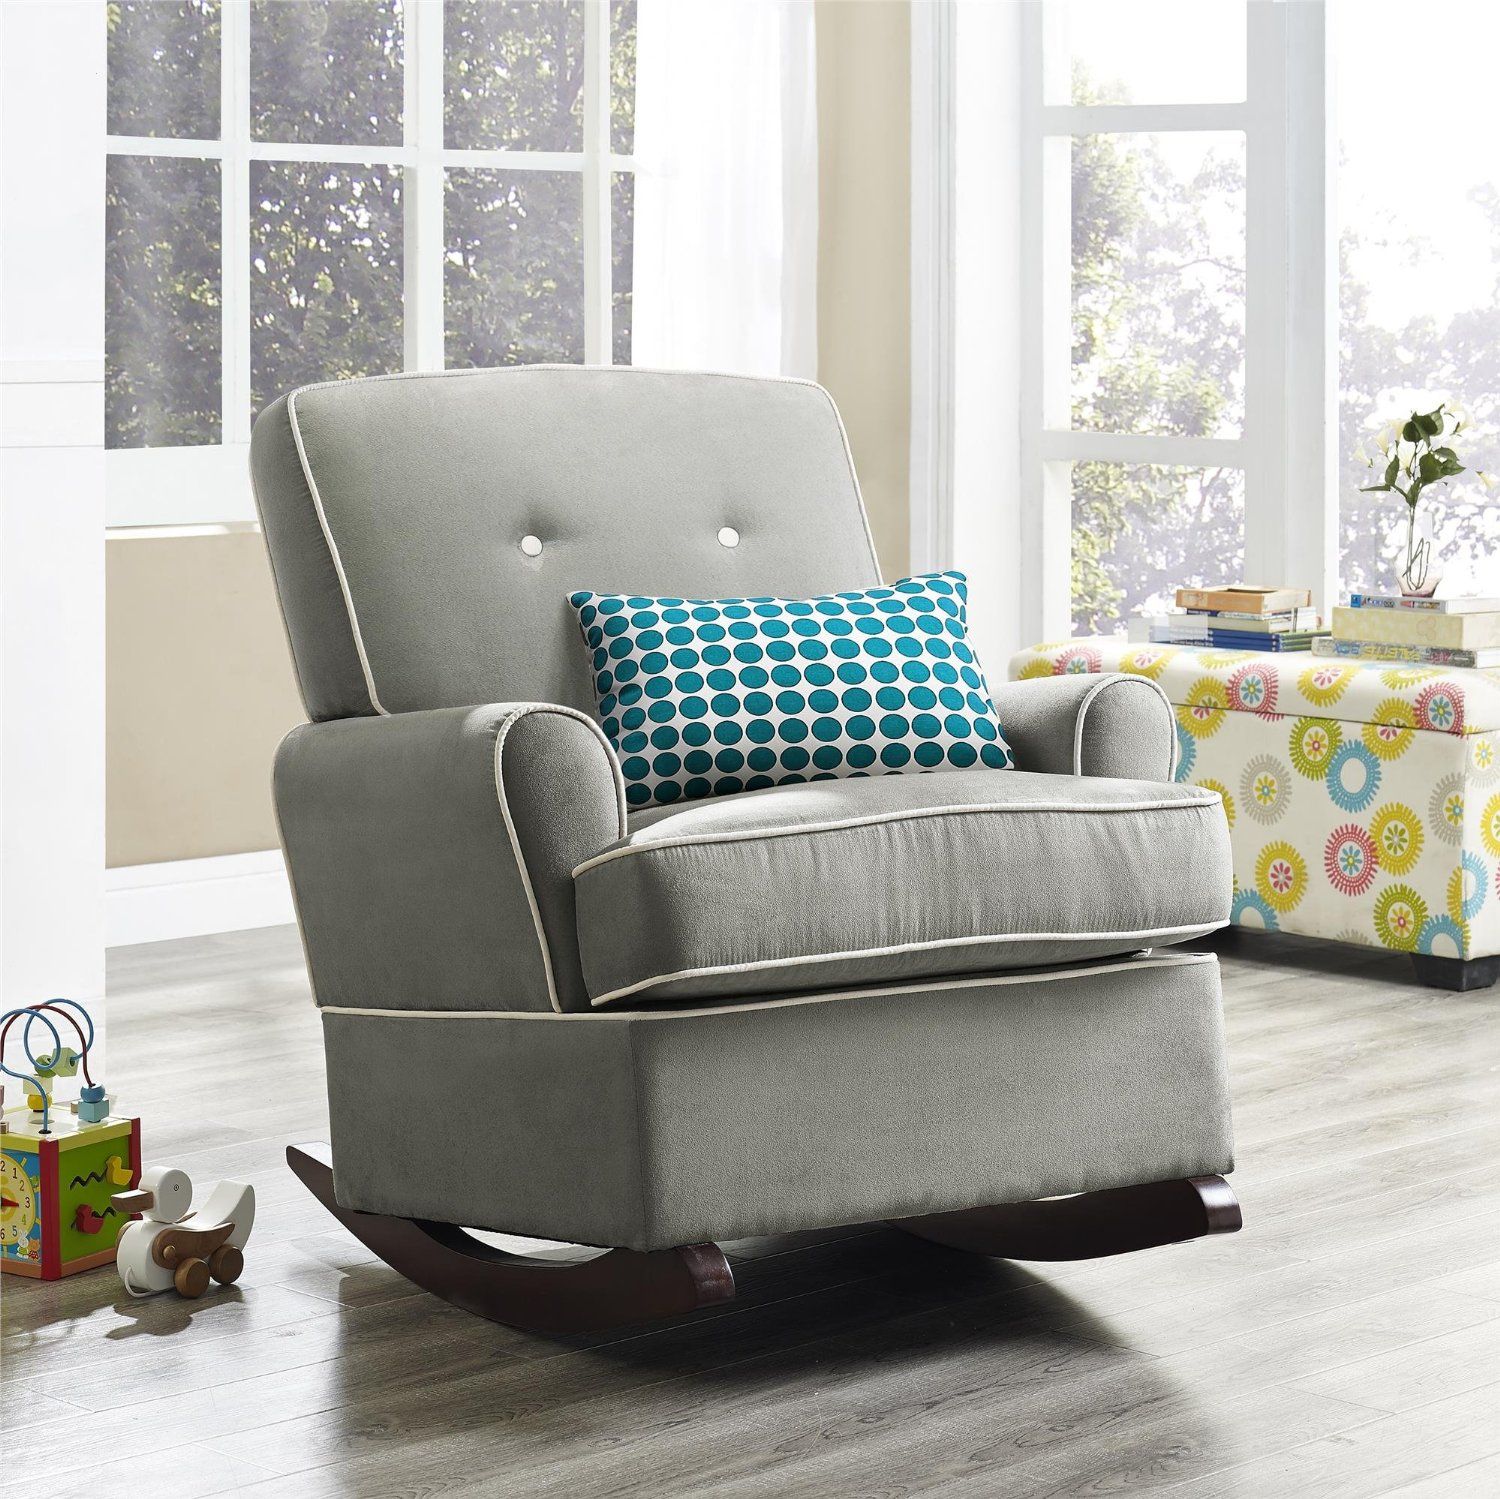 The Best Upholstered Rocking Chair 2018 | Best Rocking Chairs In Rocking Chairs Arm Chairs For Living And Nursery Room (Photo 6 of 20)